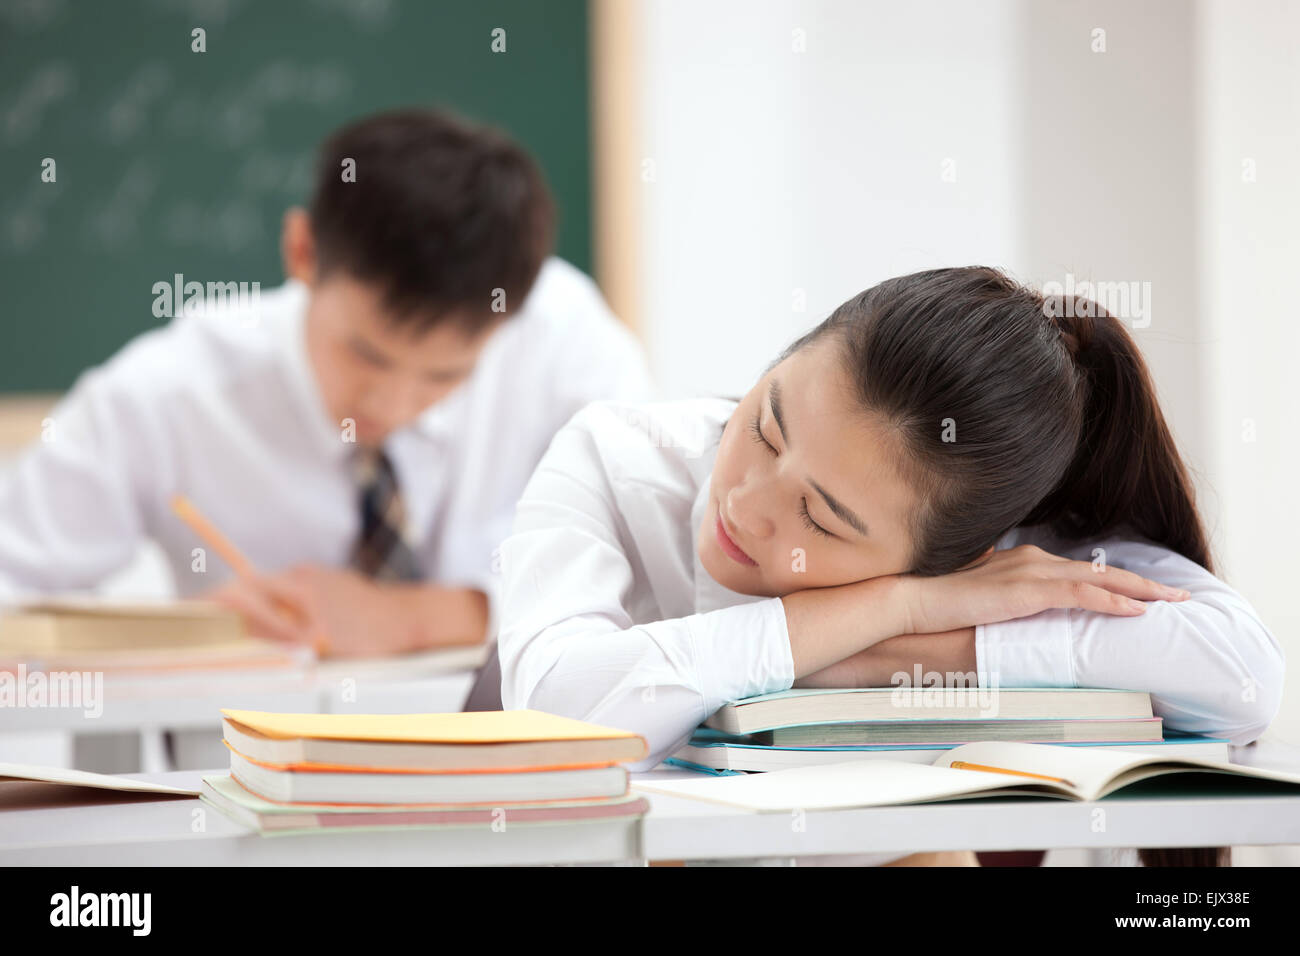 High school students rest on the desk in the classroom Stock Photo